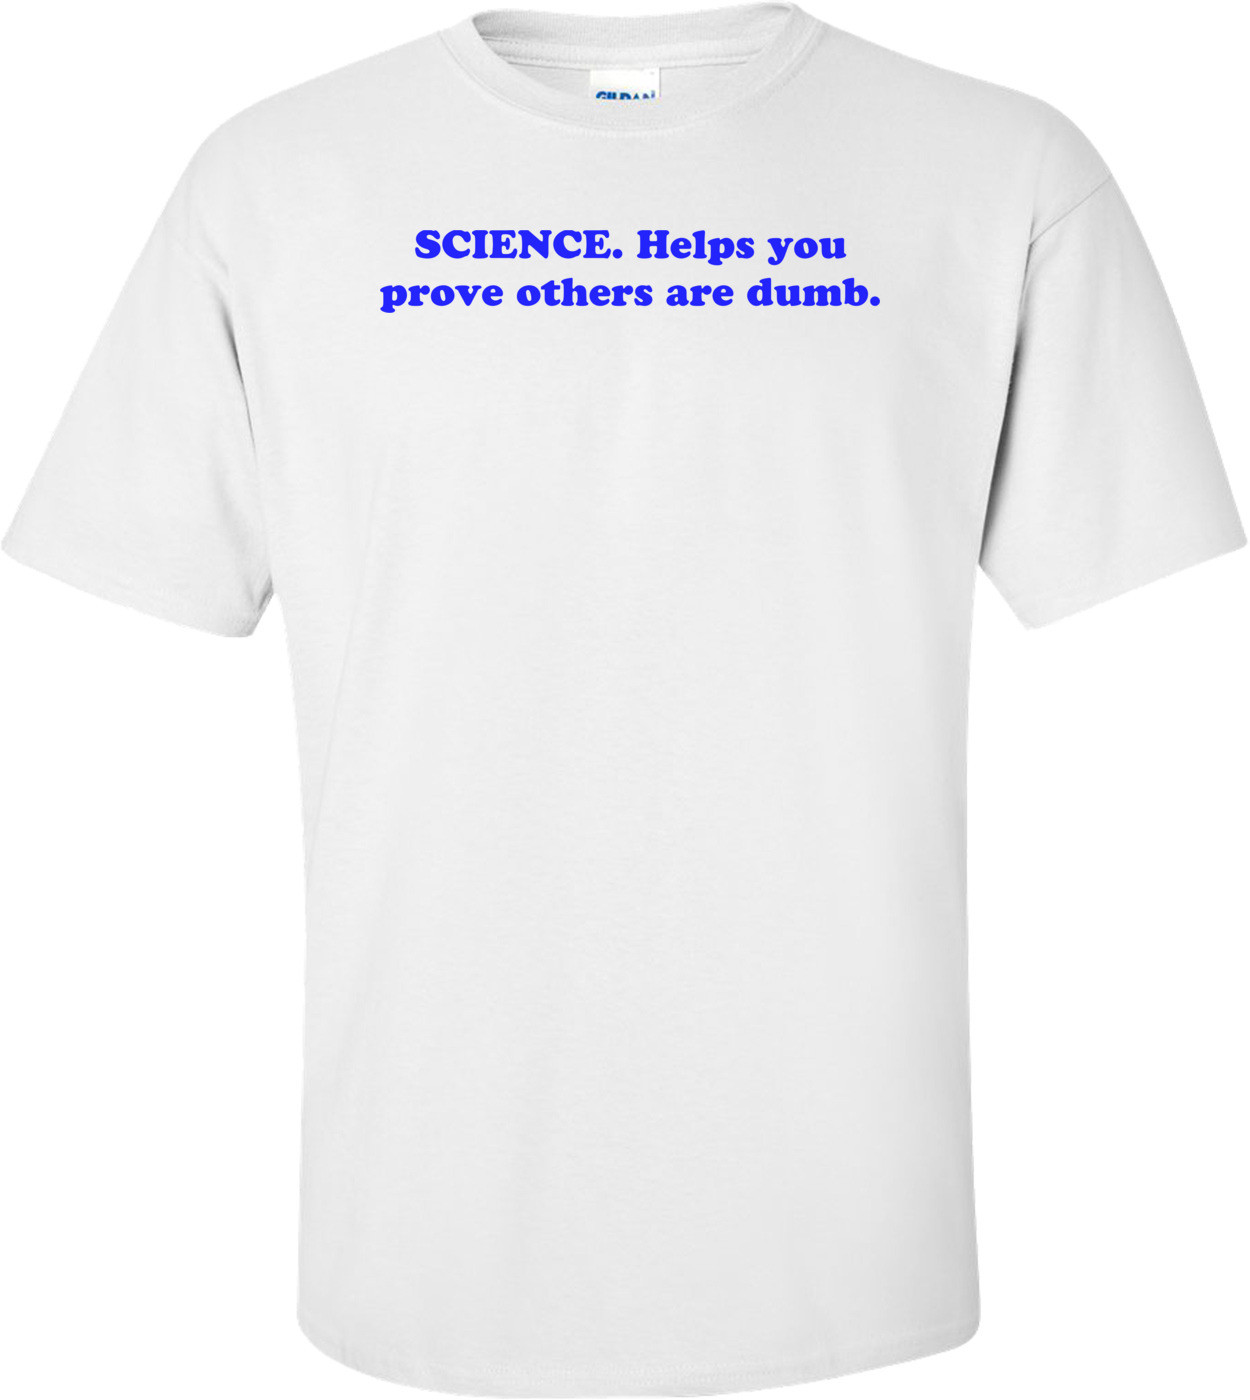 SCIENCE. Helps you prove others are dumb. shirt